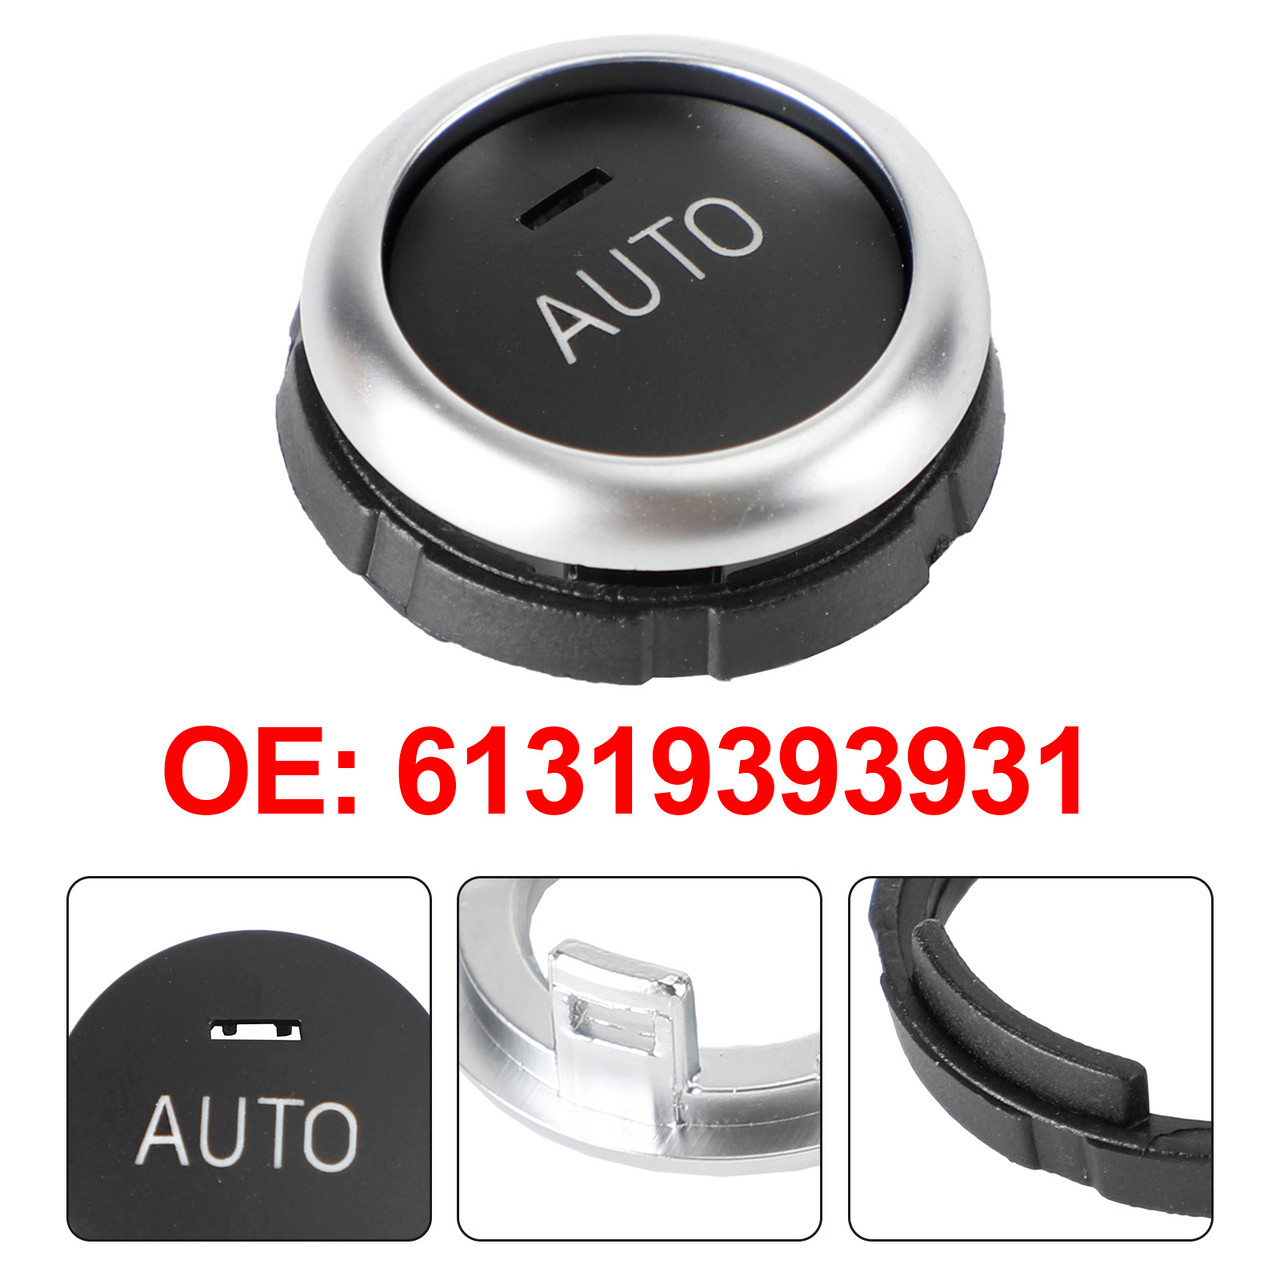 Front/Rear AC Climate Control Knob Button Cover for BMW X5 X6 61319393931